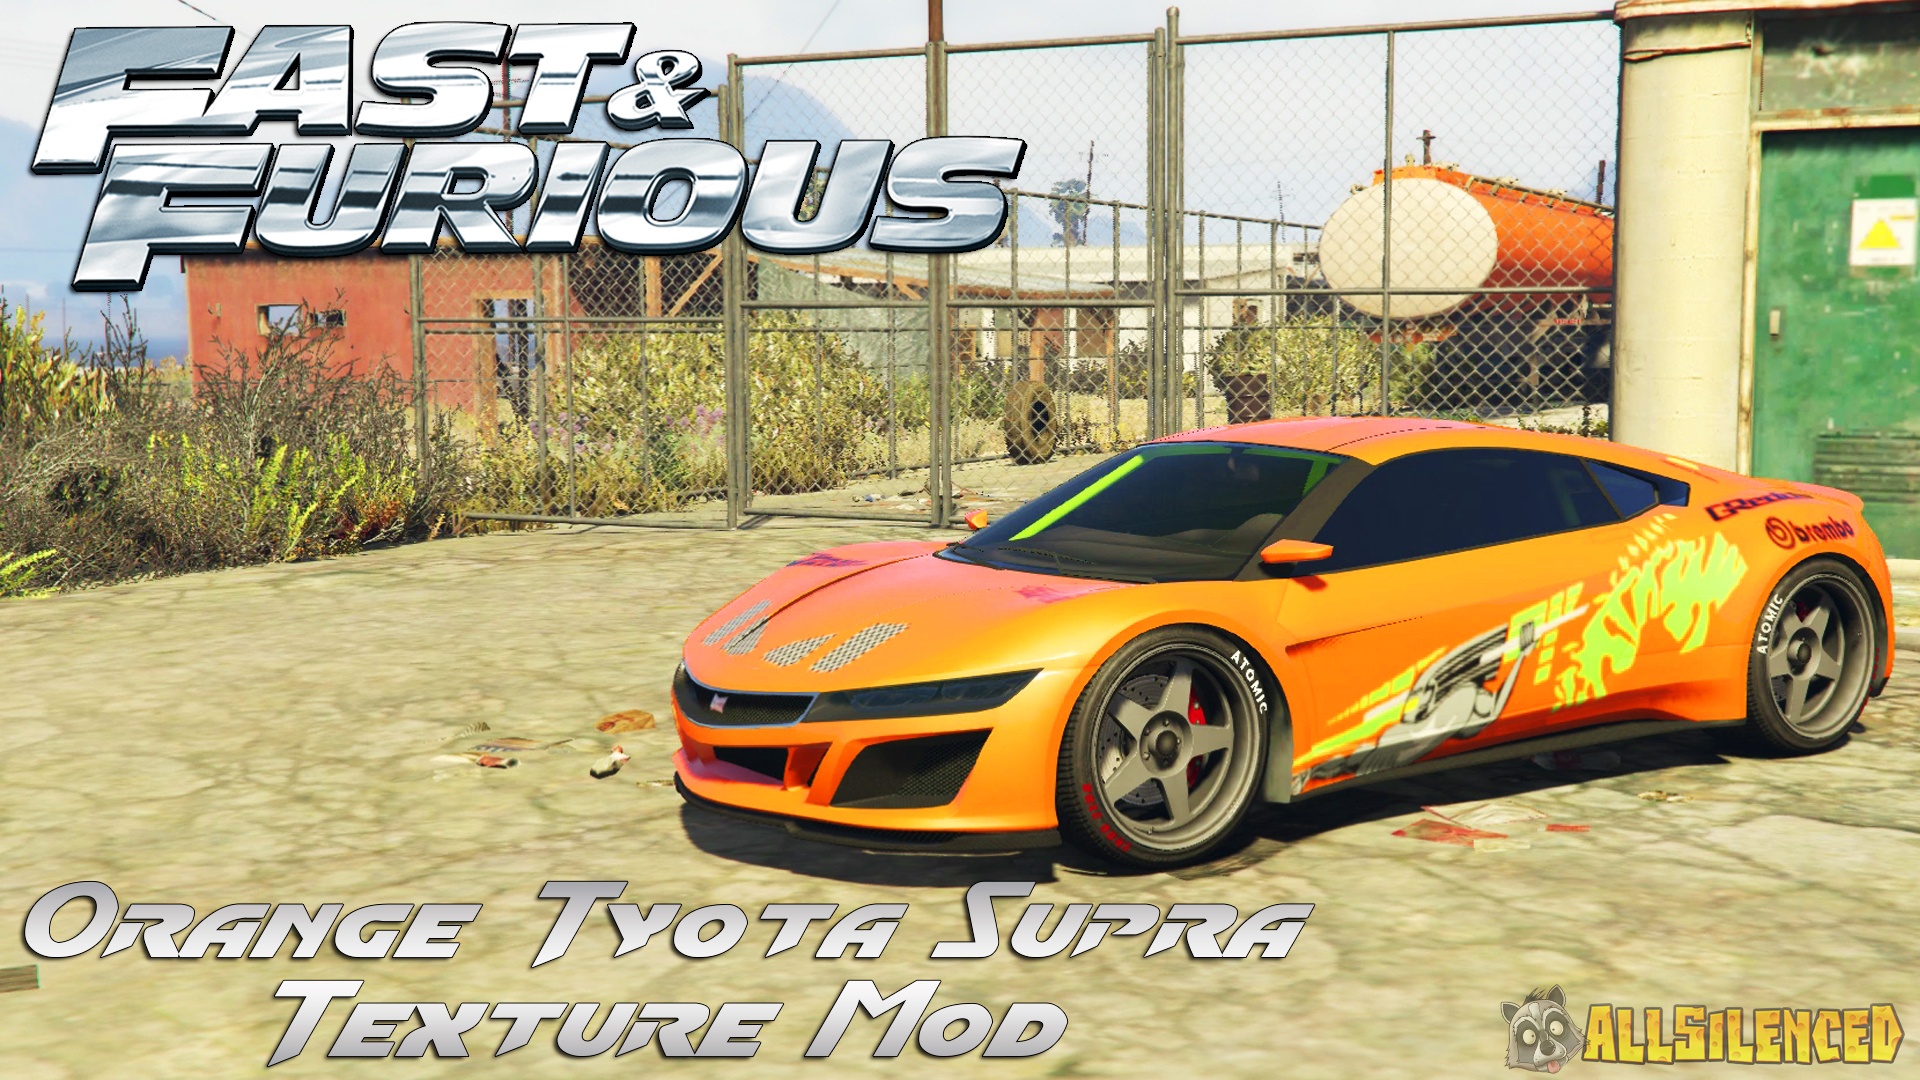 Gta 5 fast and furious cars